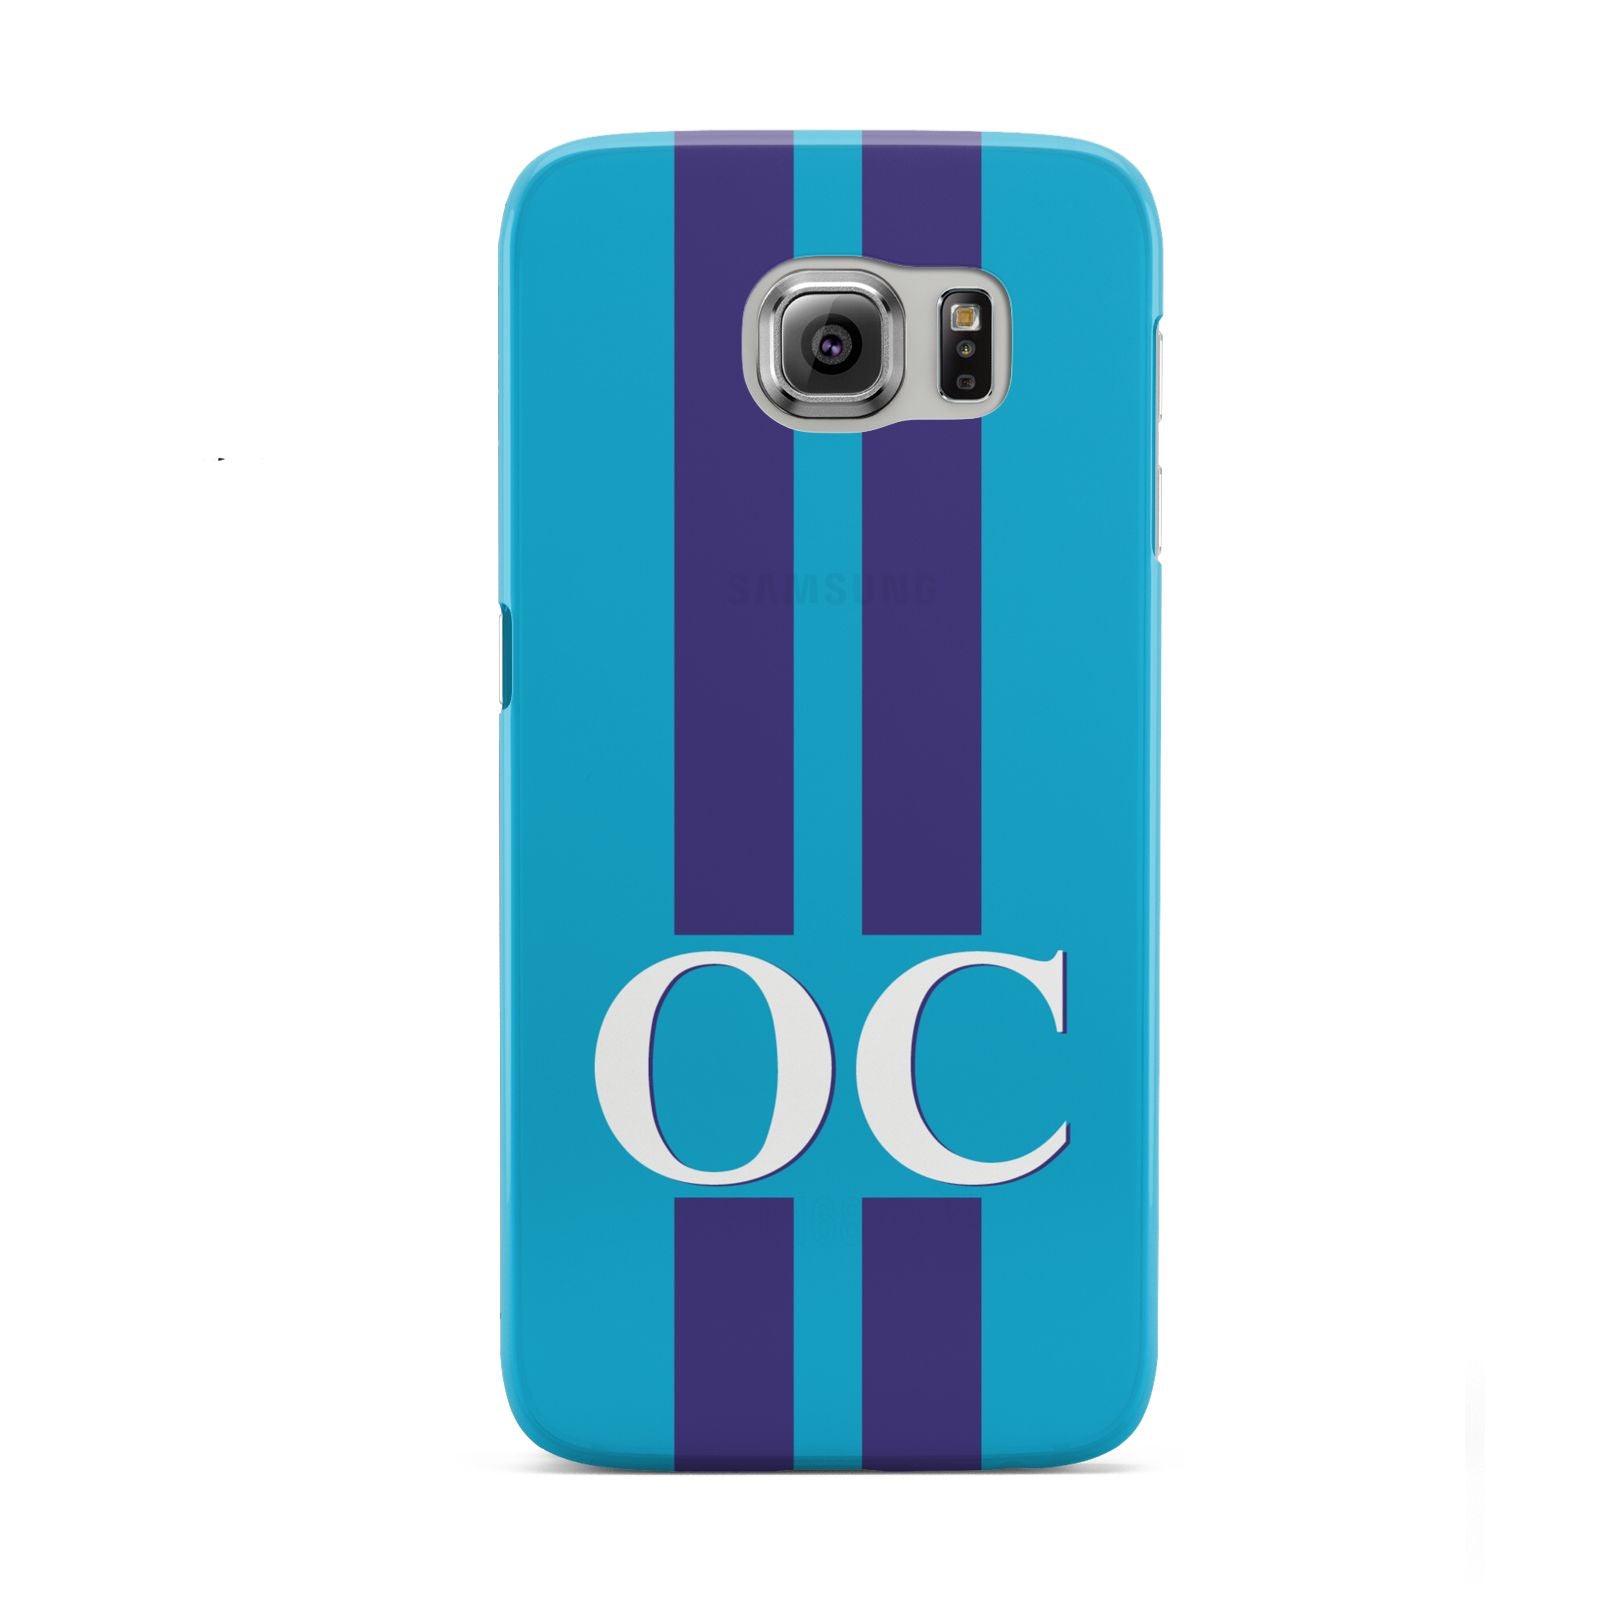 Turquoise Personalised Samsung Galaxy S6 Case